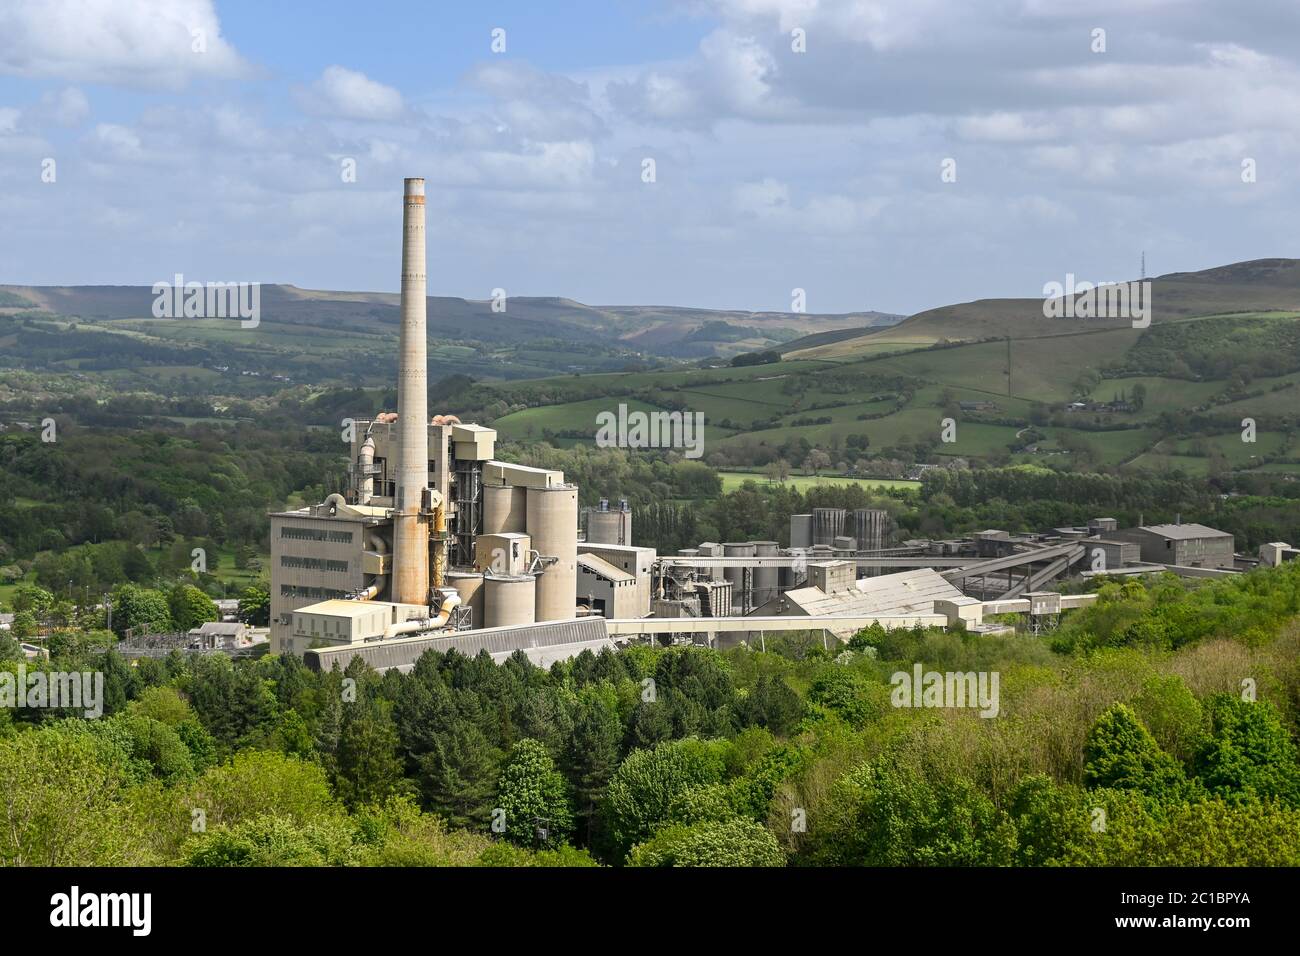 Portland Cement Works High Resolution Stock Photography and Images - Alamy